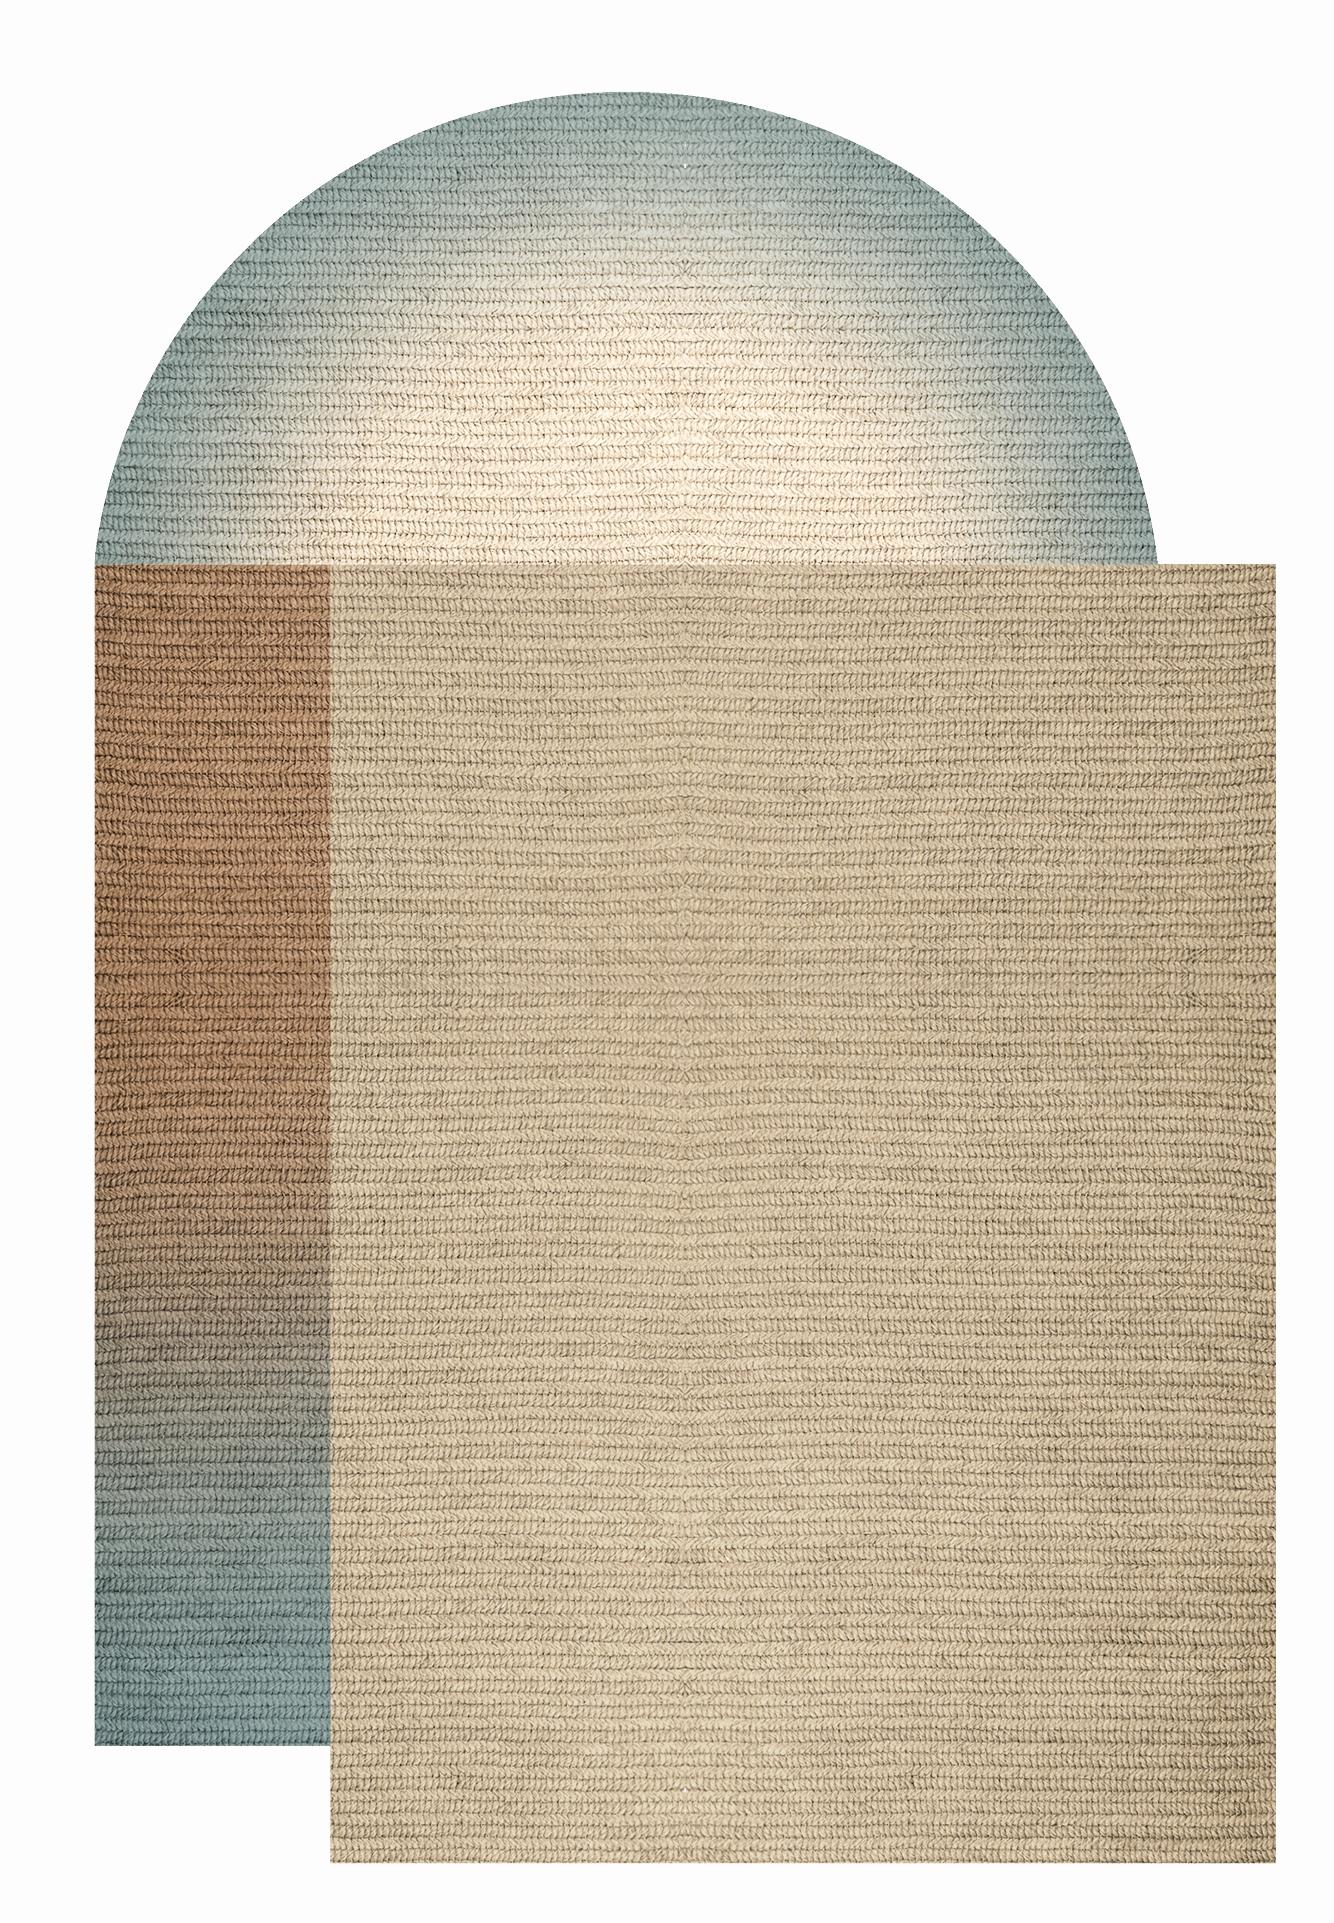 'Fade' Rug in Abaca, Colour 'Sterling' 260x390cm by Claire Vos for Musett Design For Sale